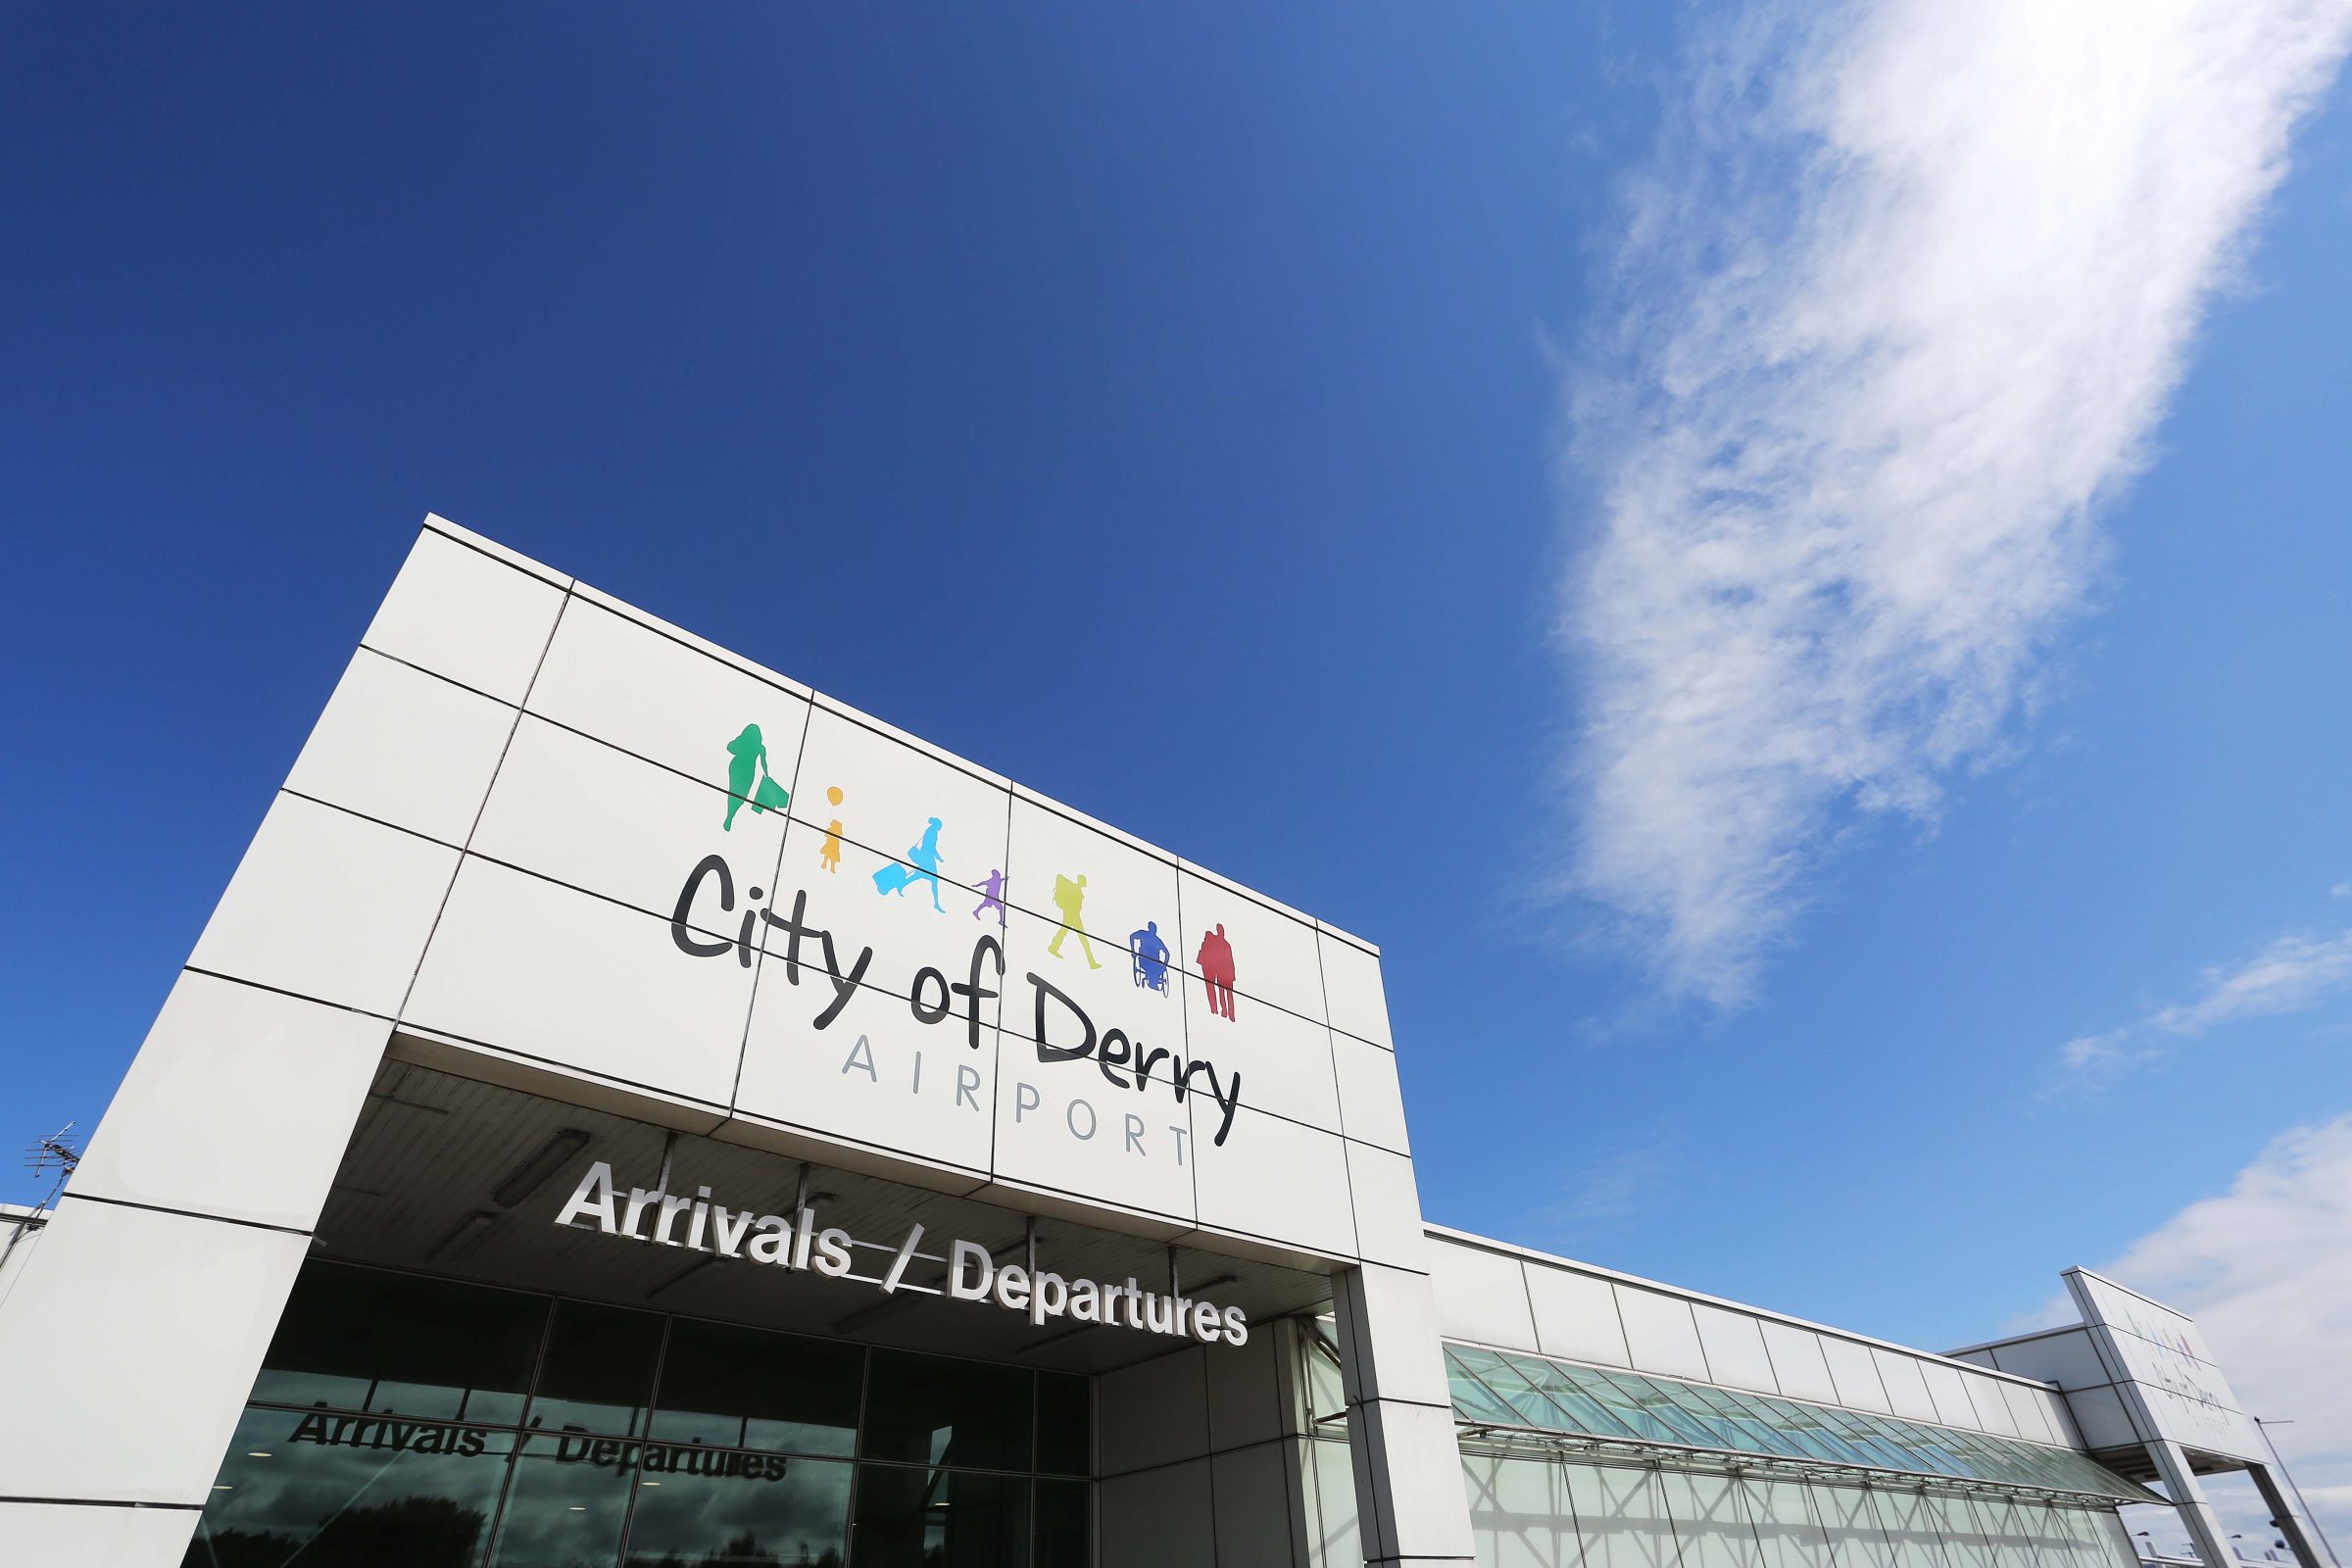 MAJORCA AND THE ALGARVE – DIRECT FROM CITY OF DERRY NEXT SUMMER